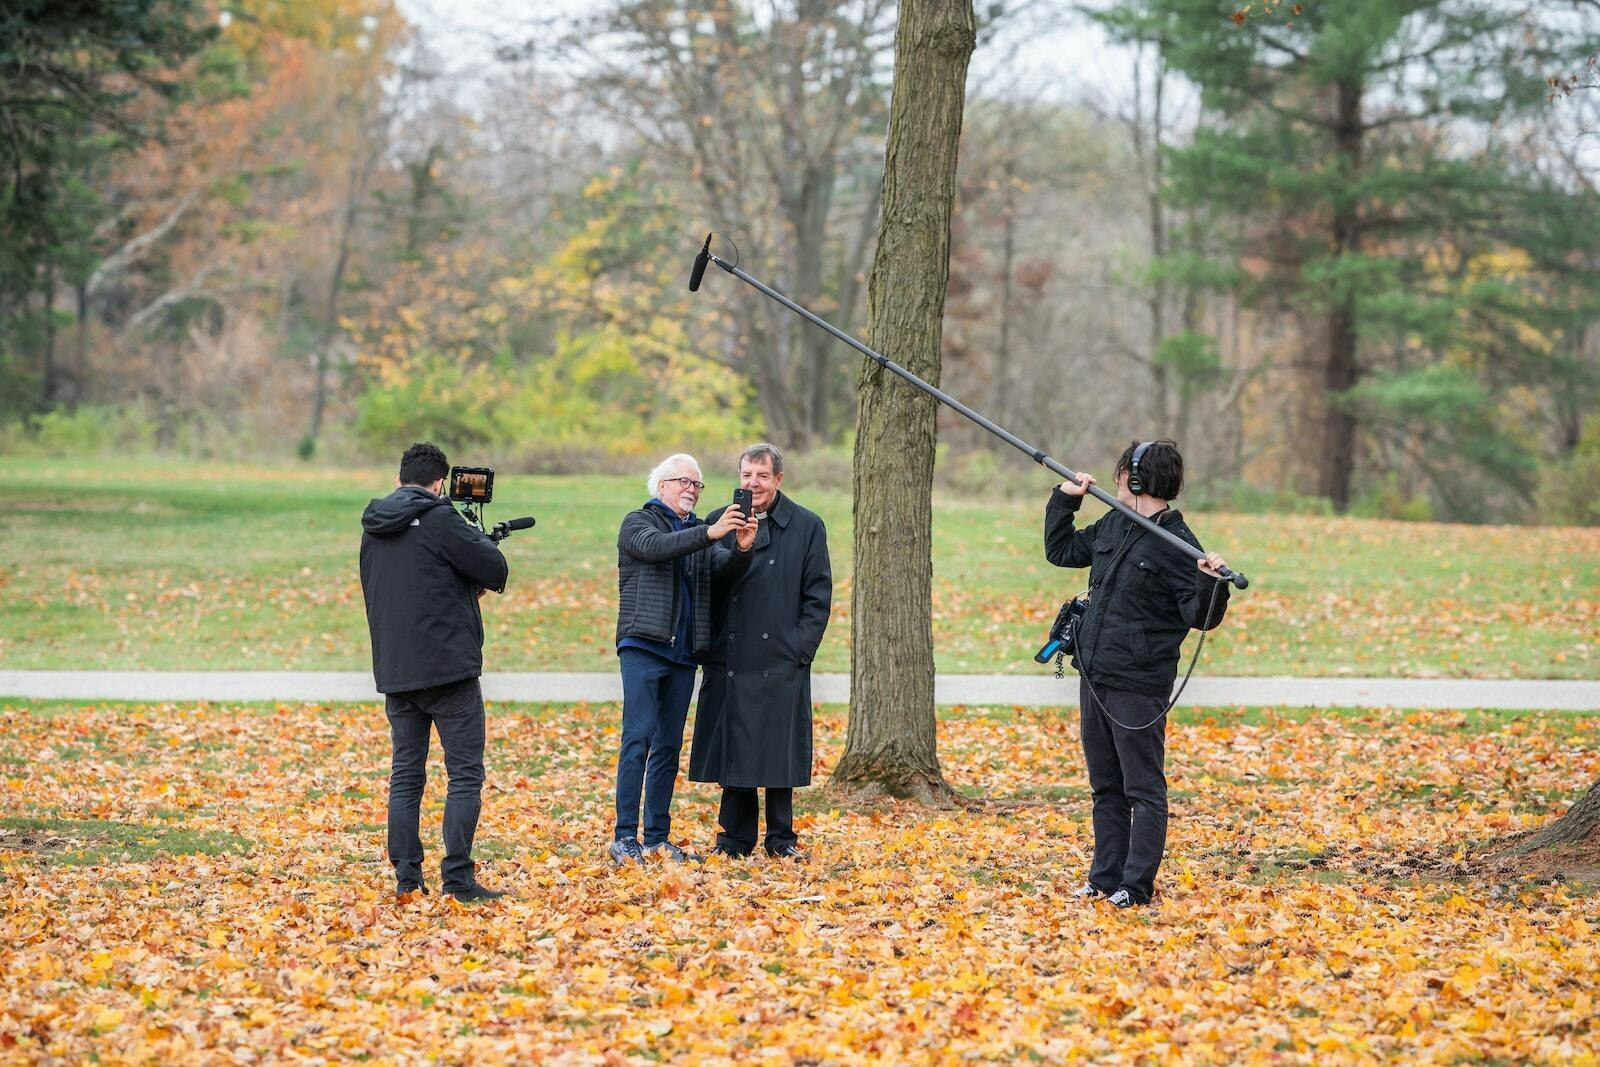 Filmmaker Keith Famie talks with Detroit Archbishop Allen H. Vigneron on the grounds of Holy Sepulchre Cemetery following the All Souls Day Mass on Nov. 2. Famie and his team filmed the Mass for his new project, "Detroit: The City of Faith." (Valaurian Waller | Detroit Catholic)